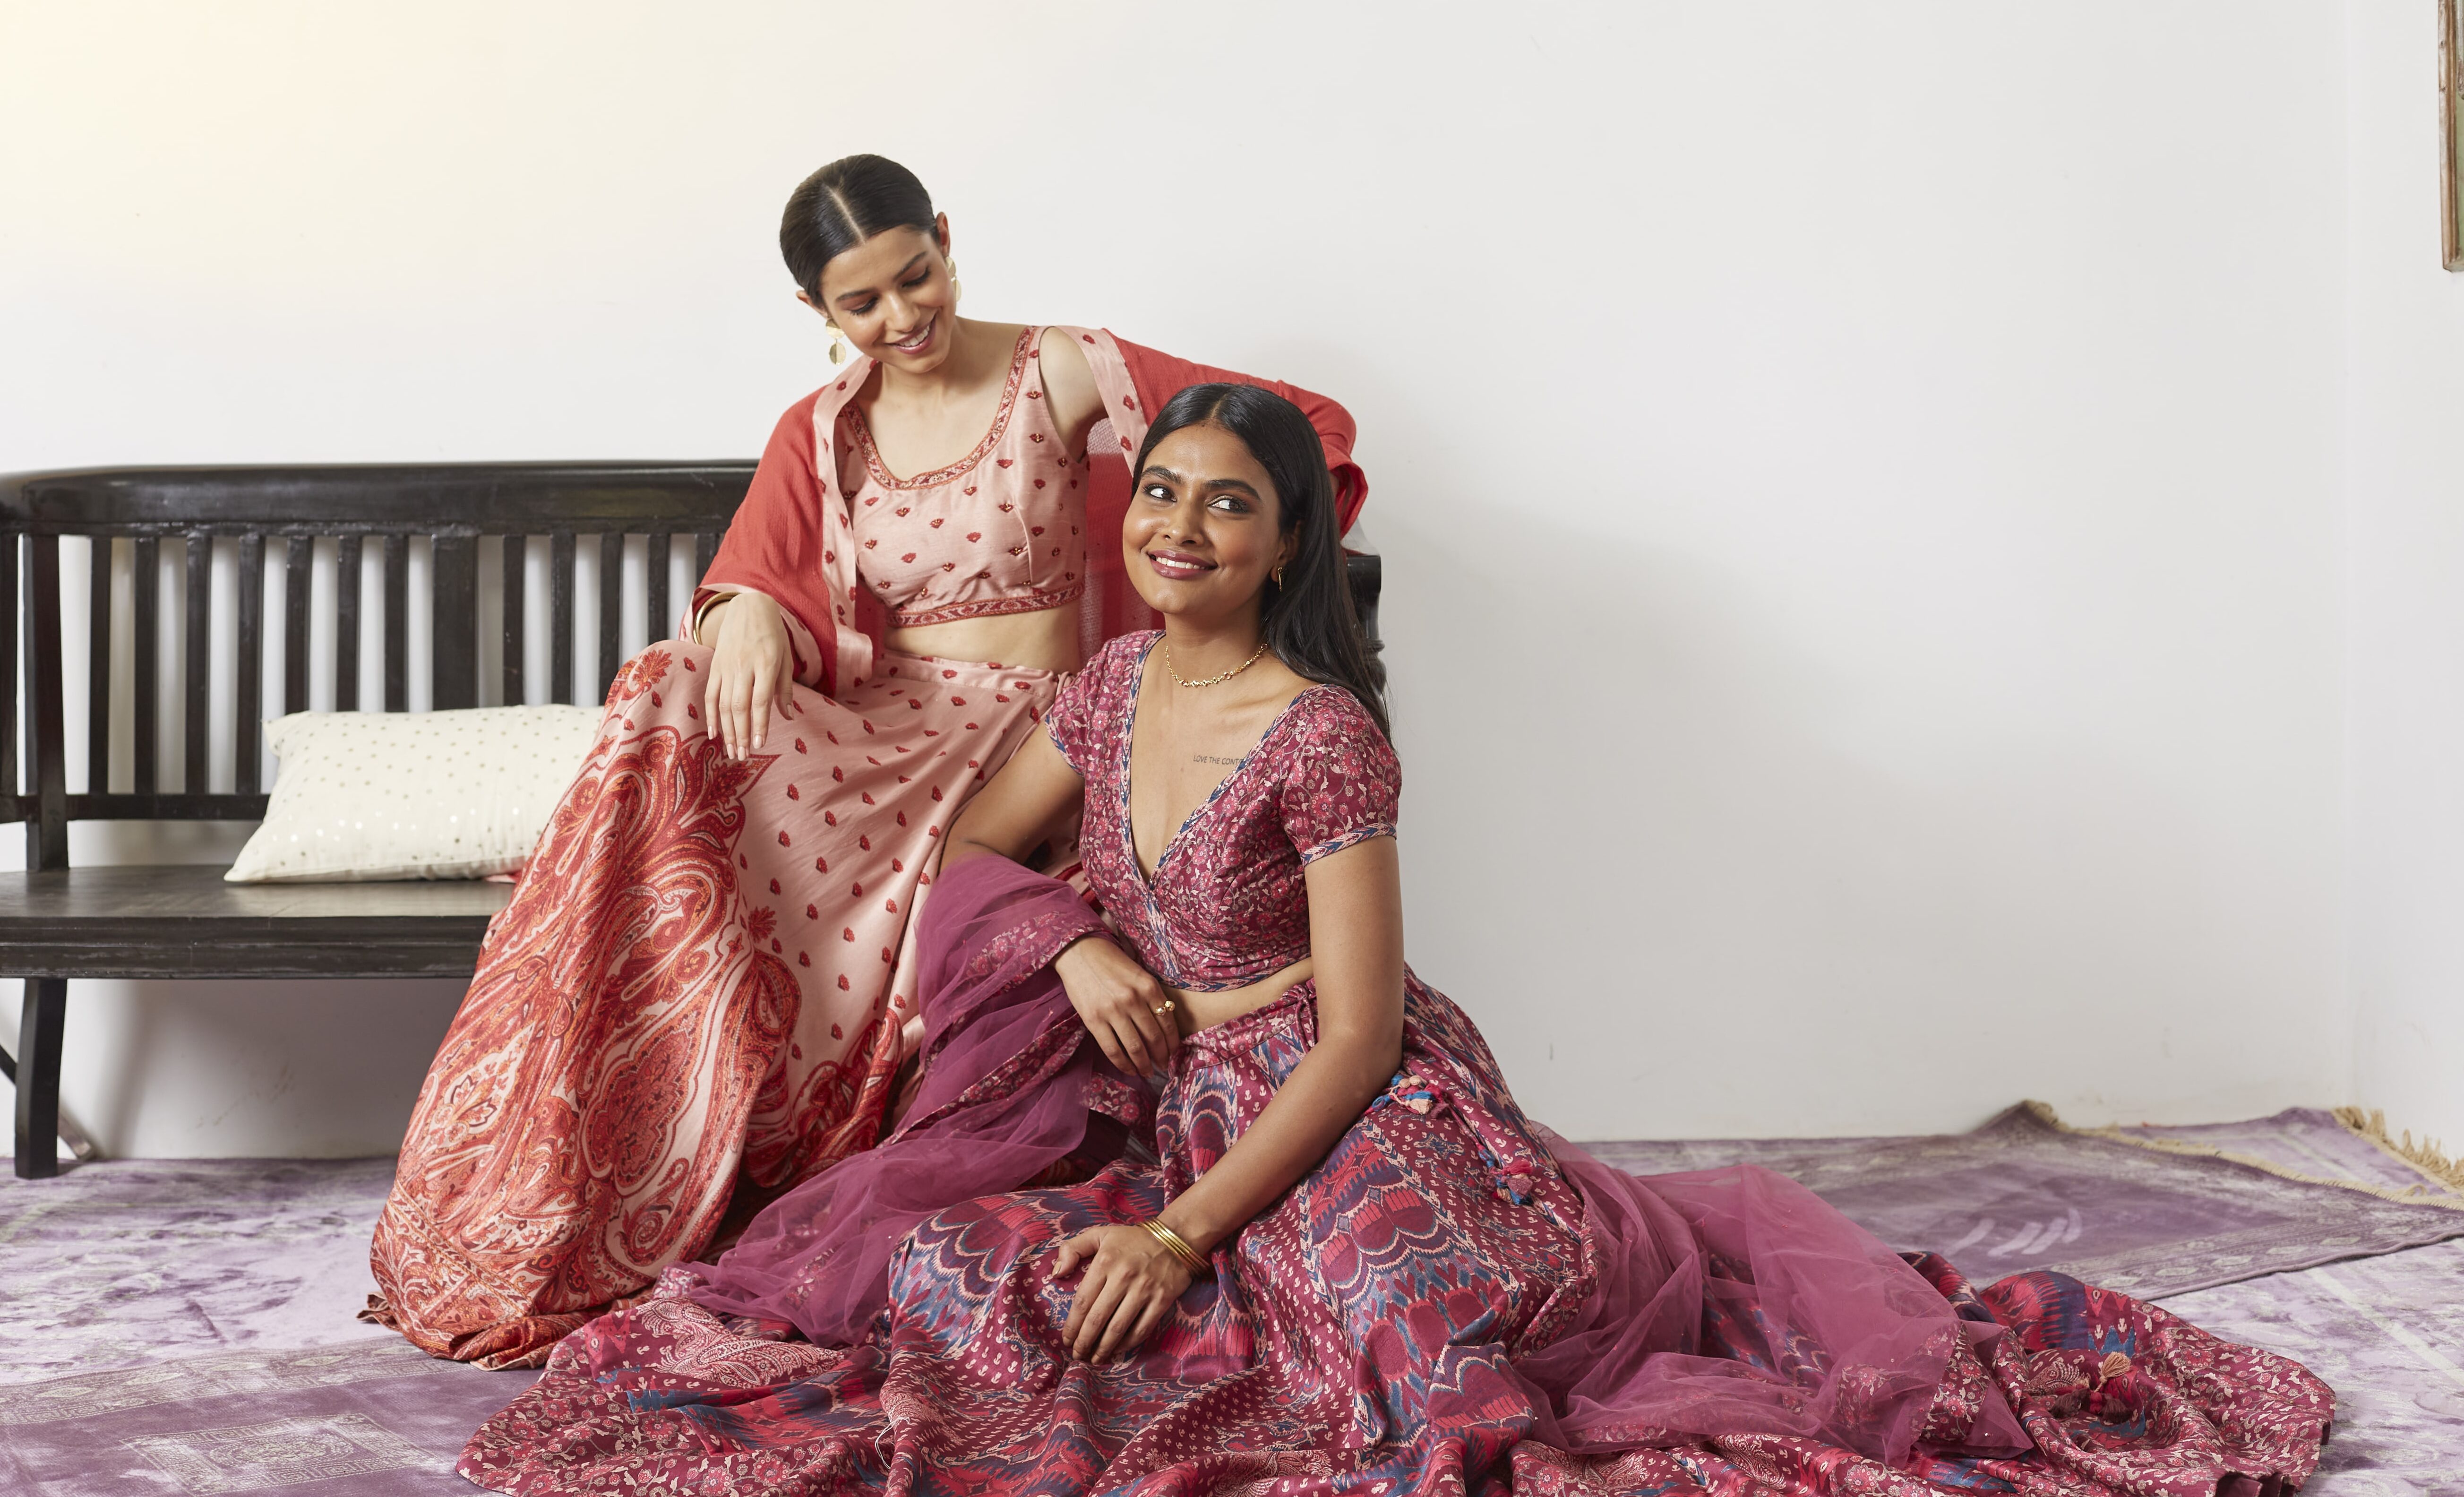 Learn The Art Of Assembling A Sustainable Bridal Outfit From Ritu Kumar